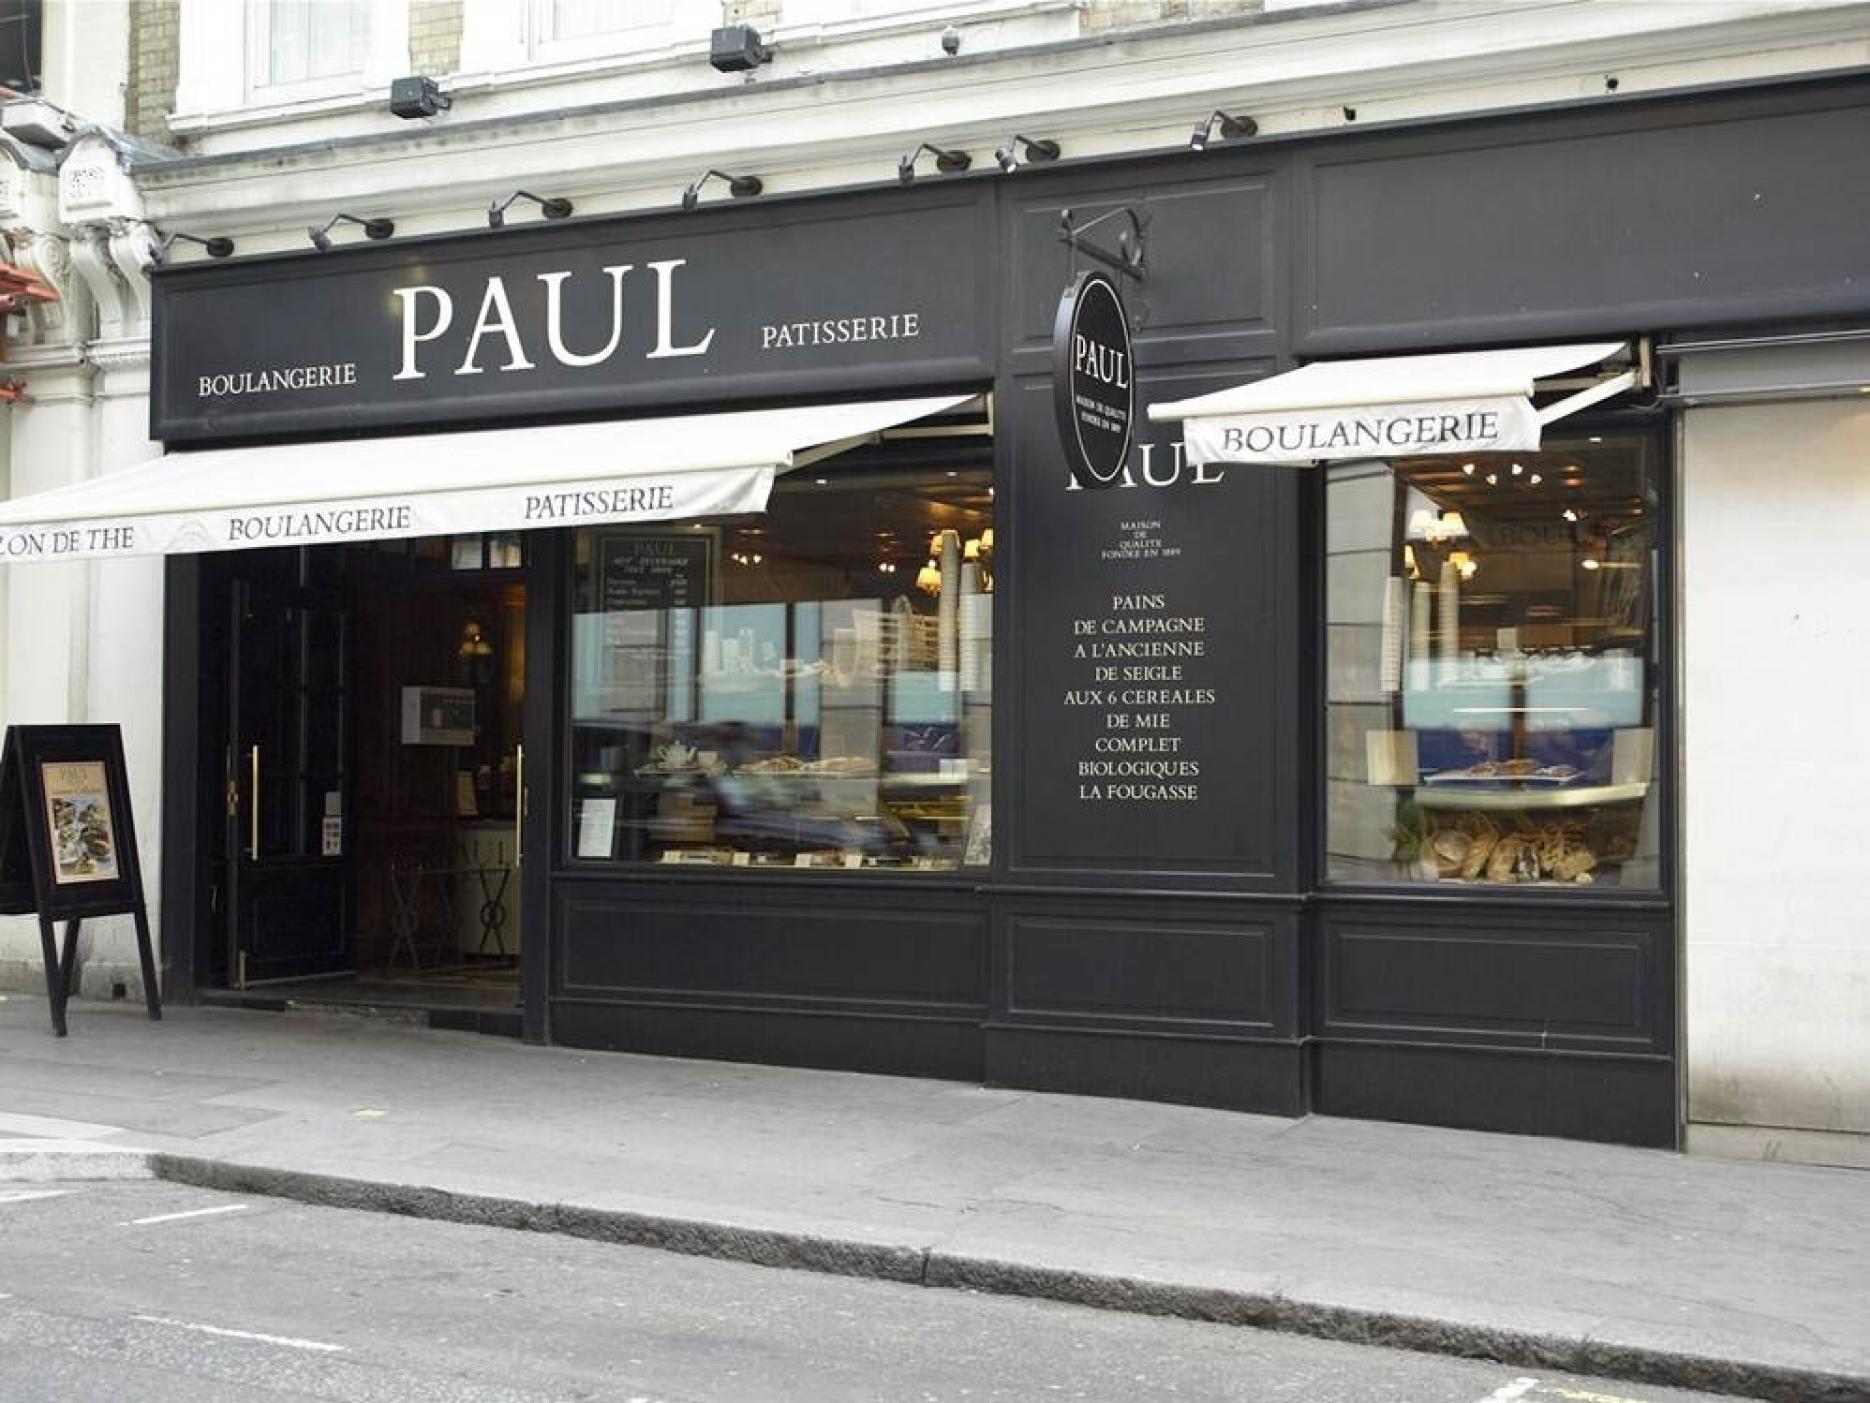 PAUL's new brand extension